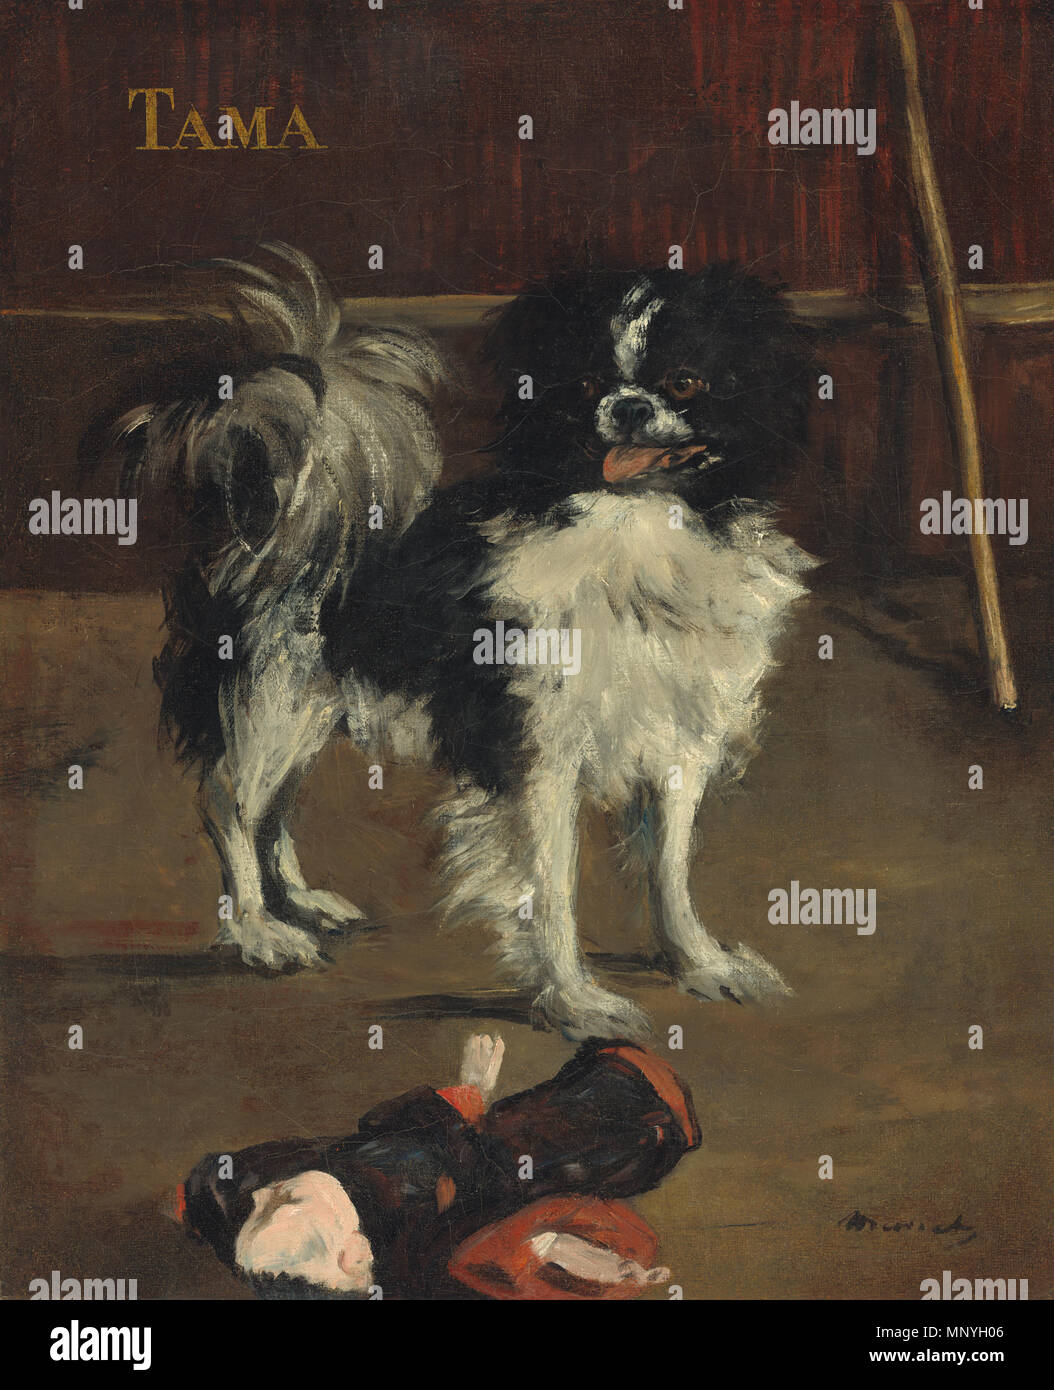 Painting; oil on canvas; overall: 61 x 50 cm (24 x 19 11/16 in.) framed: 87 x 75.9 x 8.9 cm (34 1/4 x 29 7/8 x 3 1/2 in.); Tama, the Japanese Dog 1289 Édouard Manet - TAMA Stock Photo